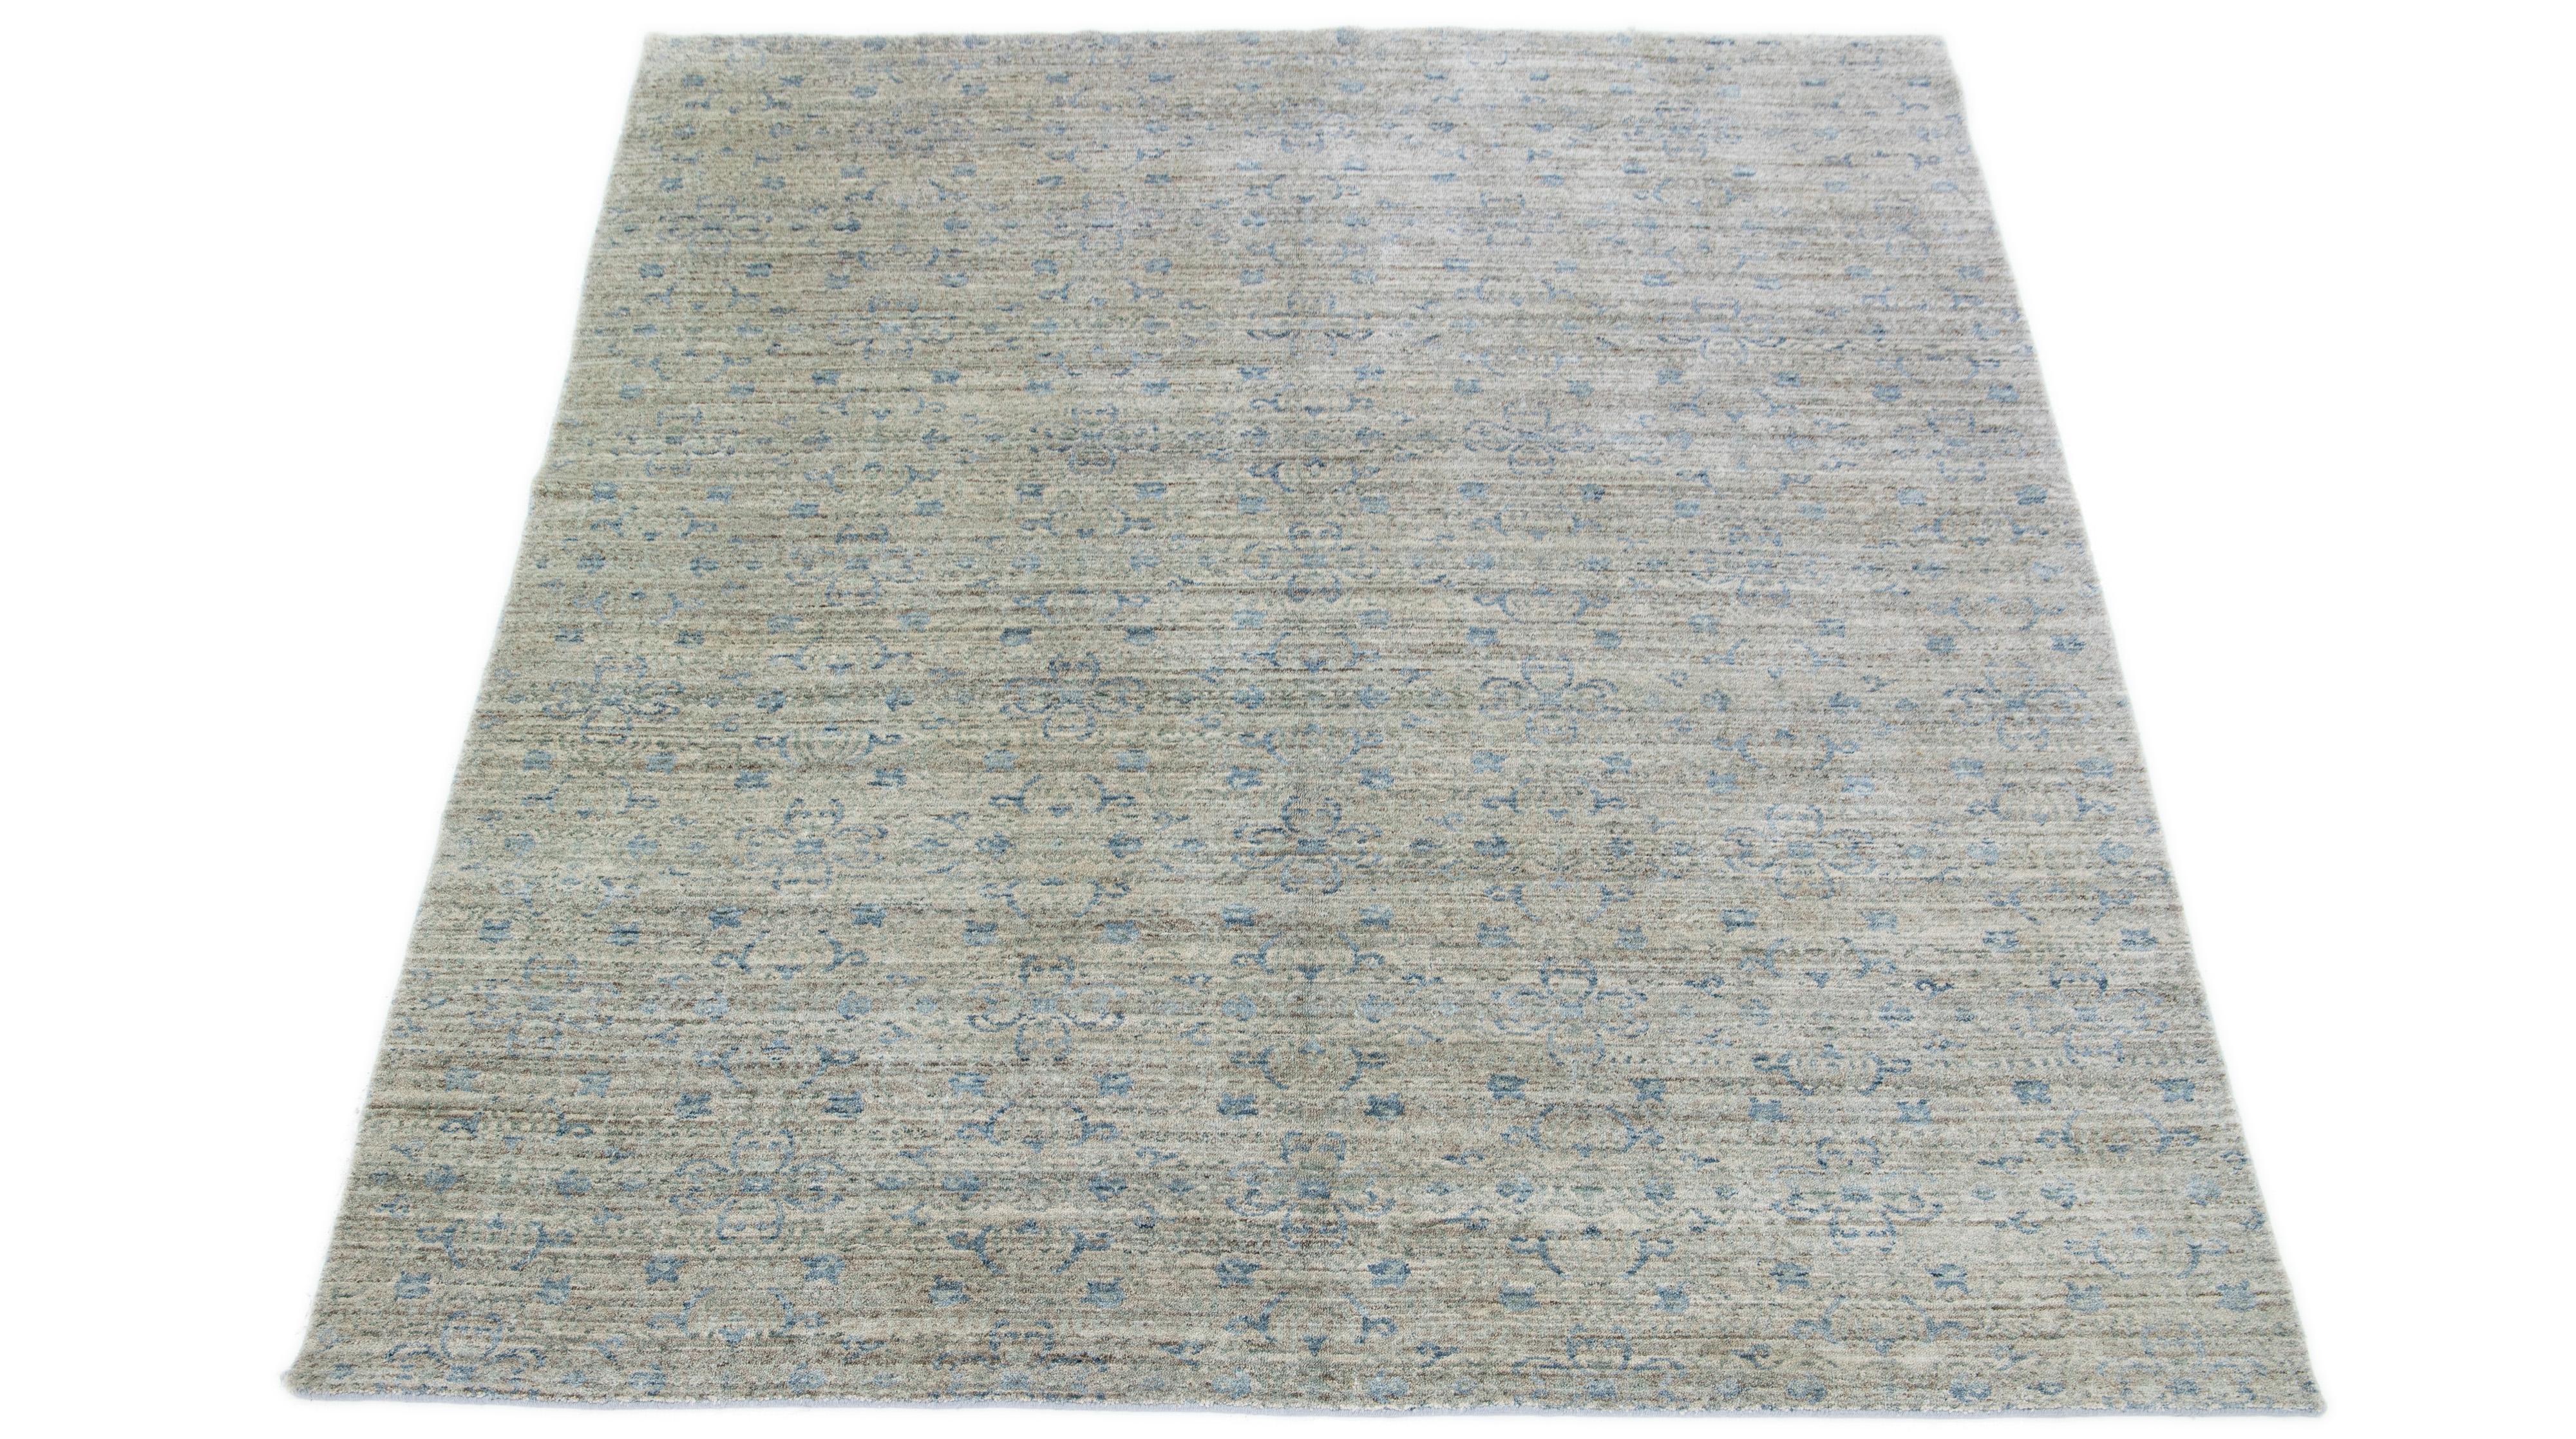 This elegant rug, made from wool and silk, displays an enthralling floral pattern in blue and light green hues, expertly embodied over a seductive light gray base tone.

This rug measures 7'11